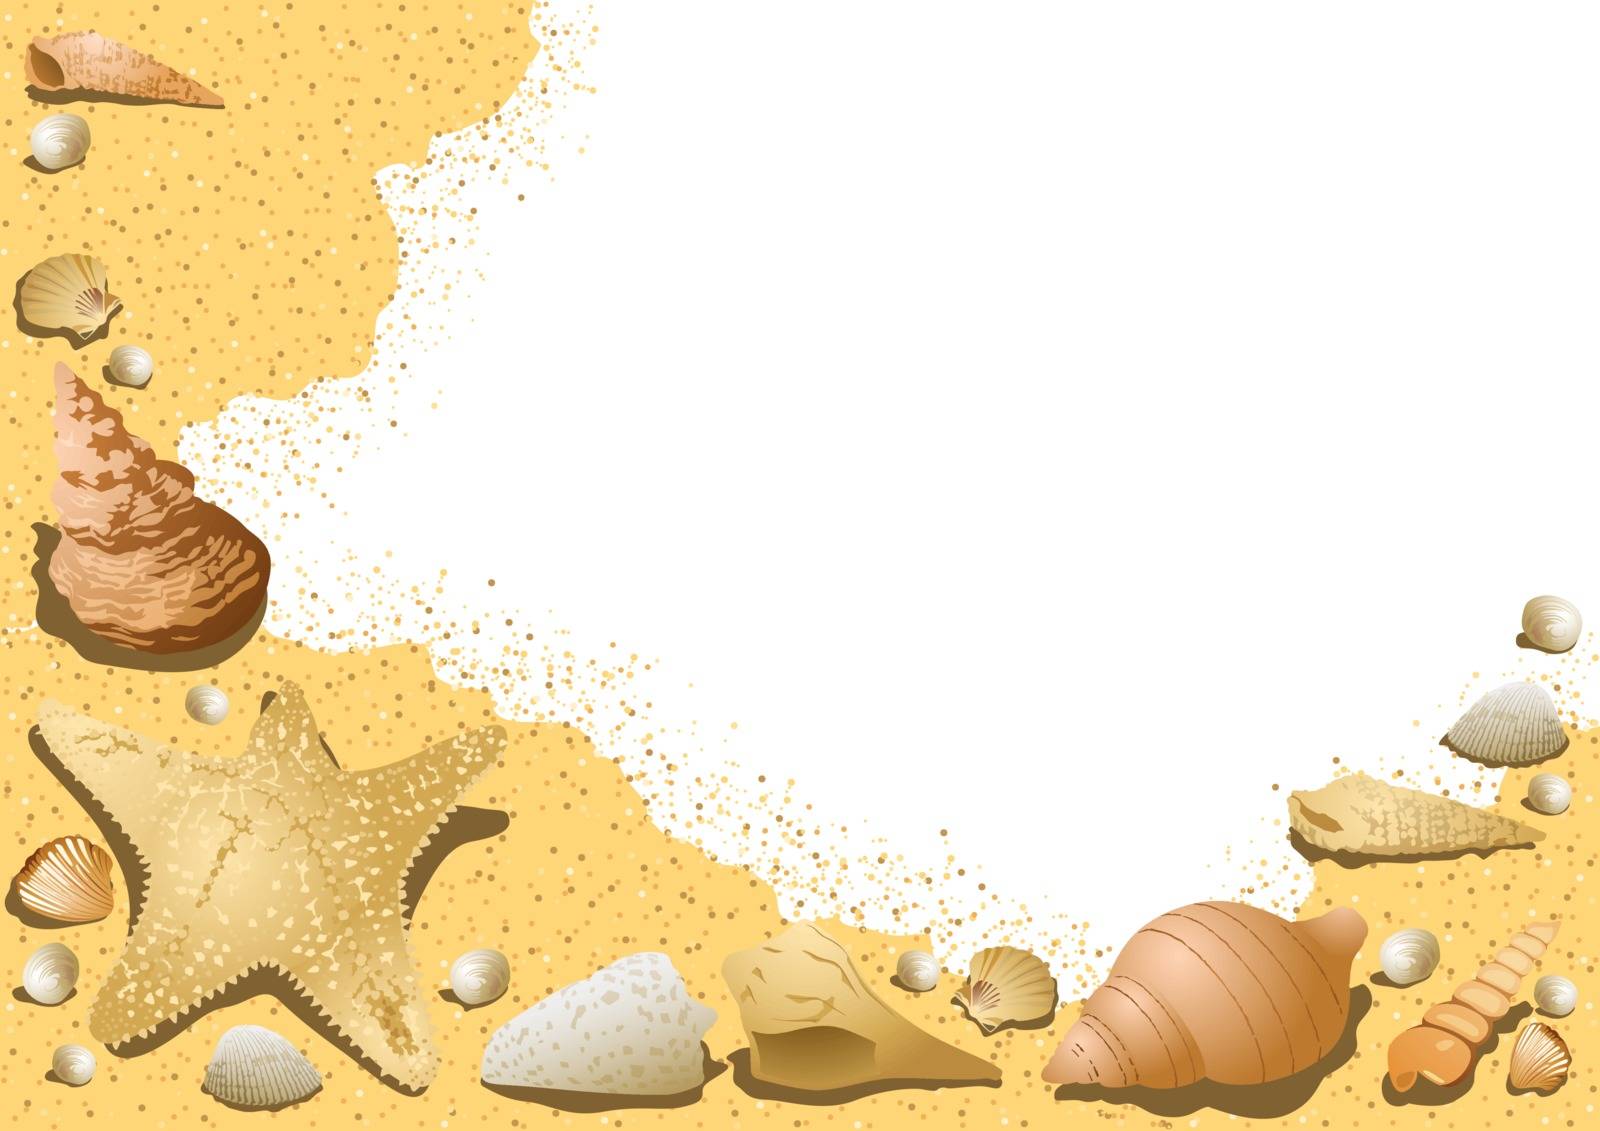 Sandy Background with Seashells - Decorative Illustration with Underwater Life, Vector